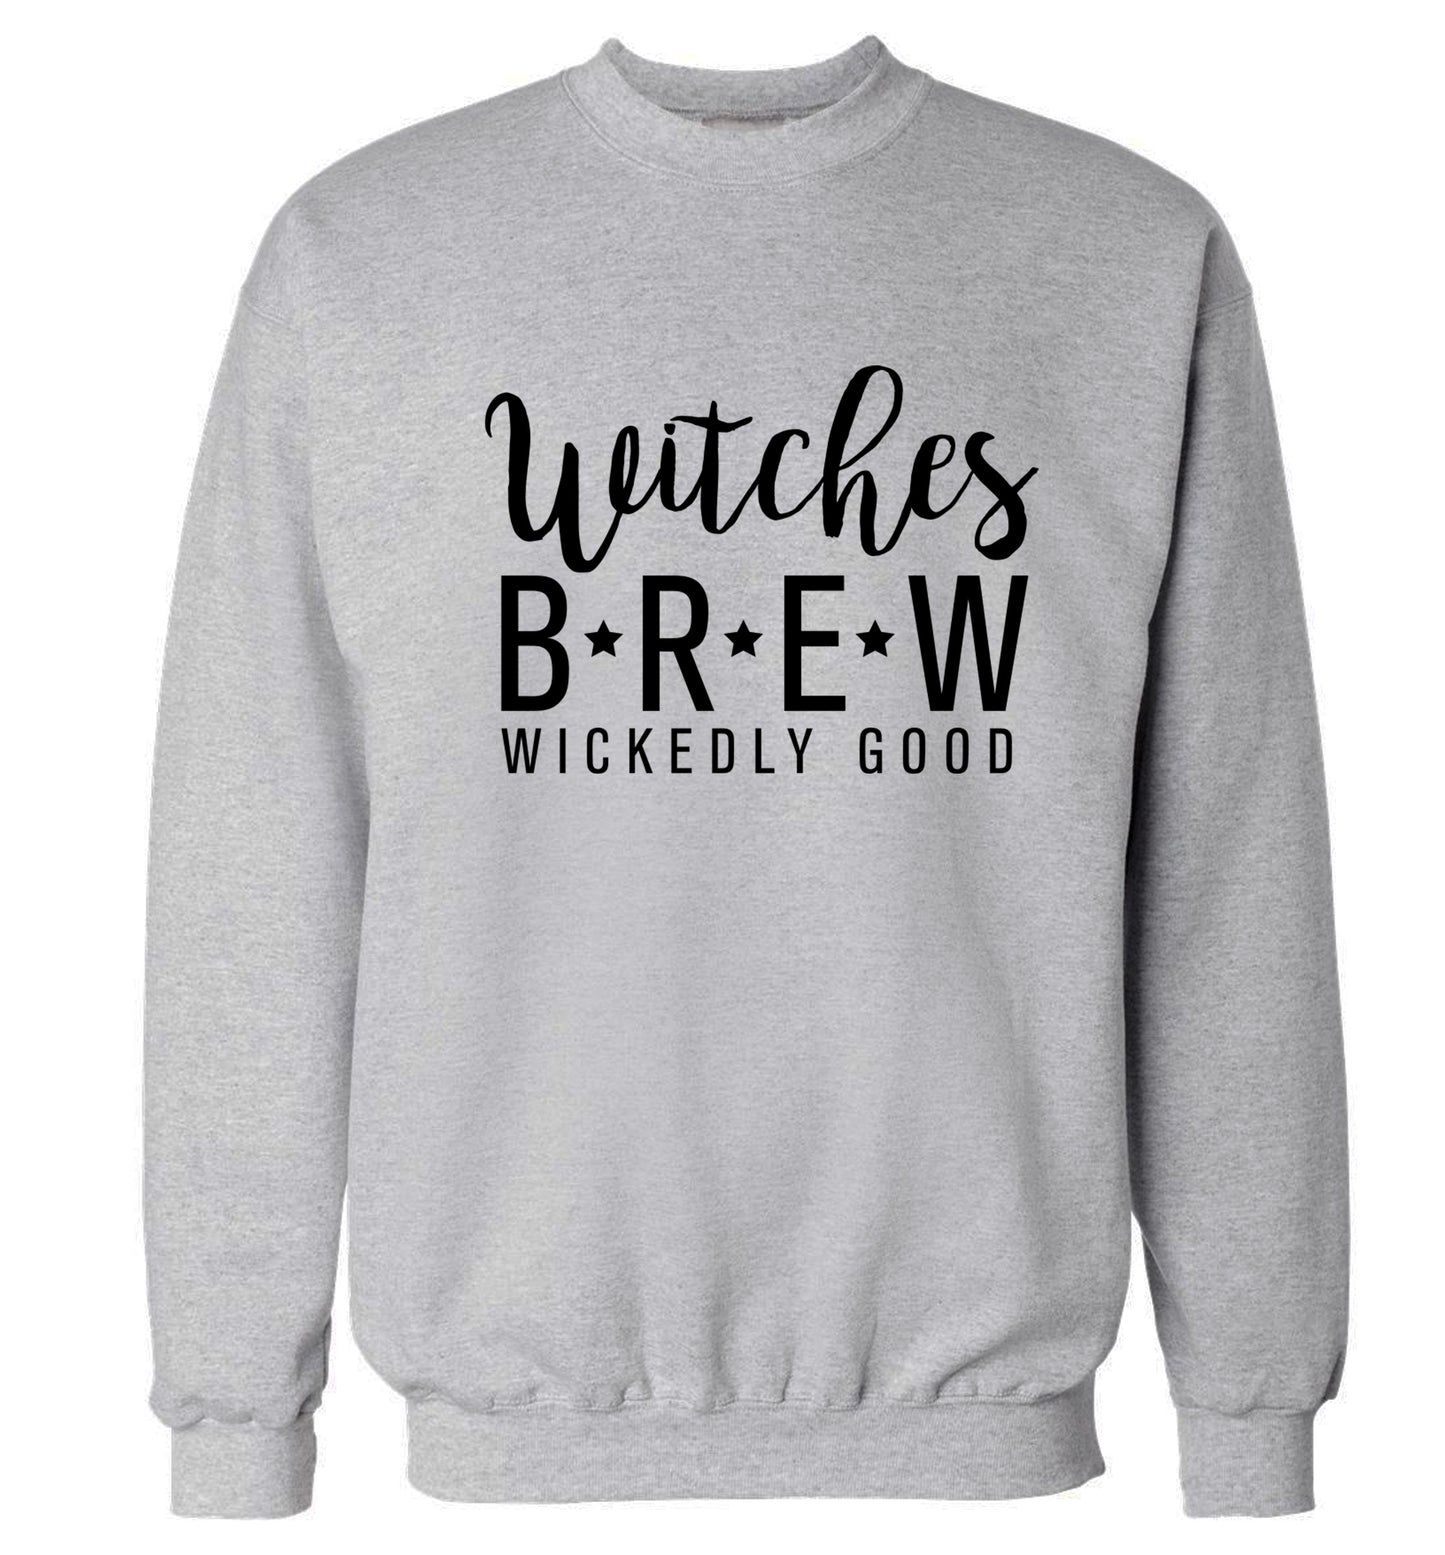 Witches Brew wickedly good Adult's unisex grey Sweater 2XL